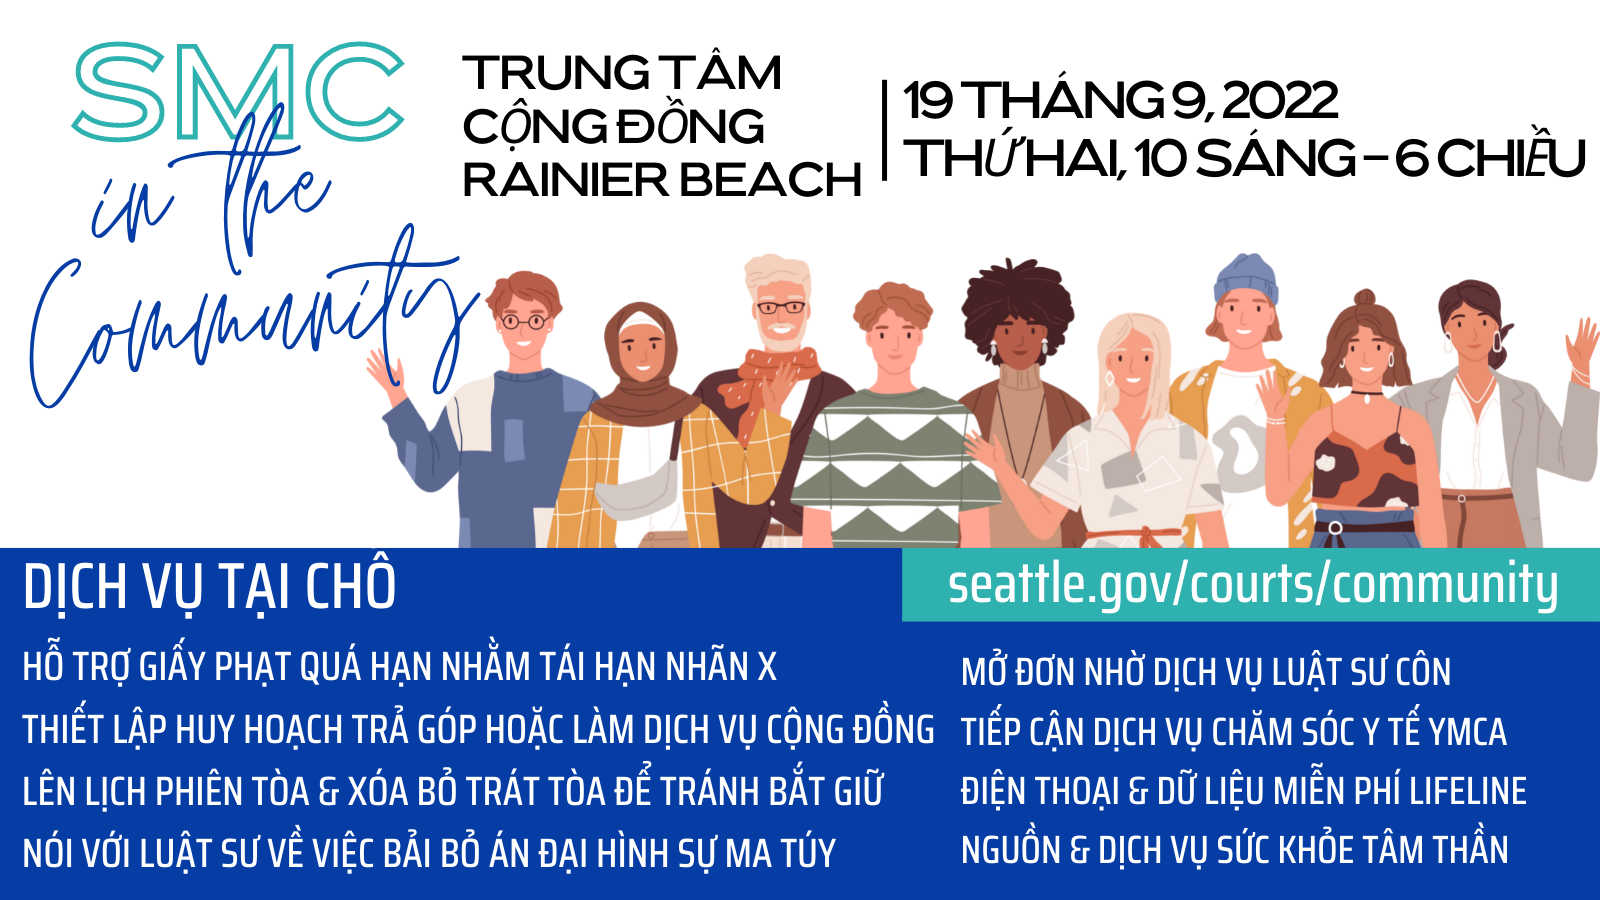 SMC in the Community event banner with a group of smiling and waving cartoon people and event info in Vietnamese